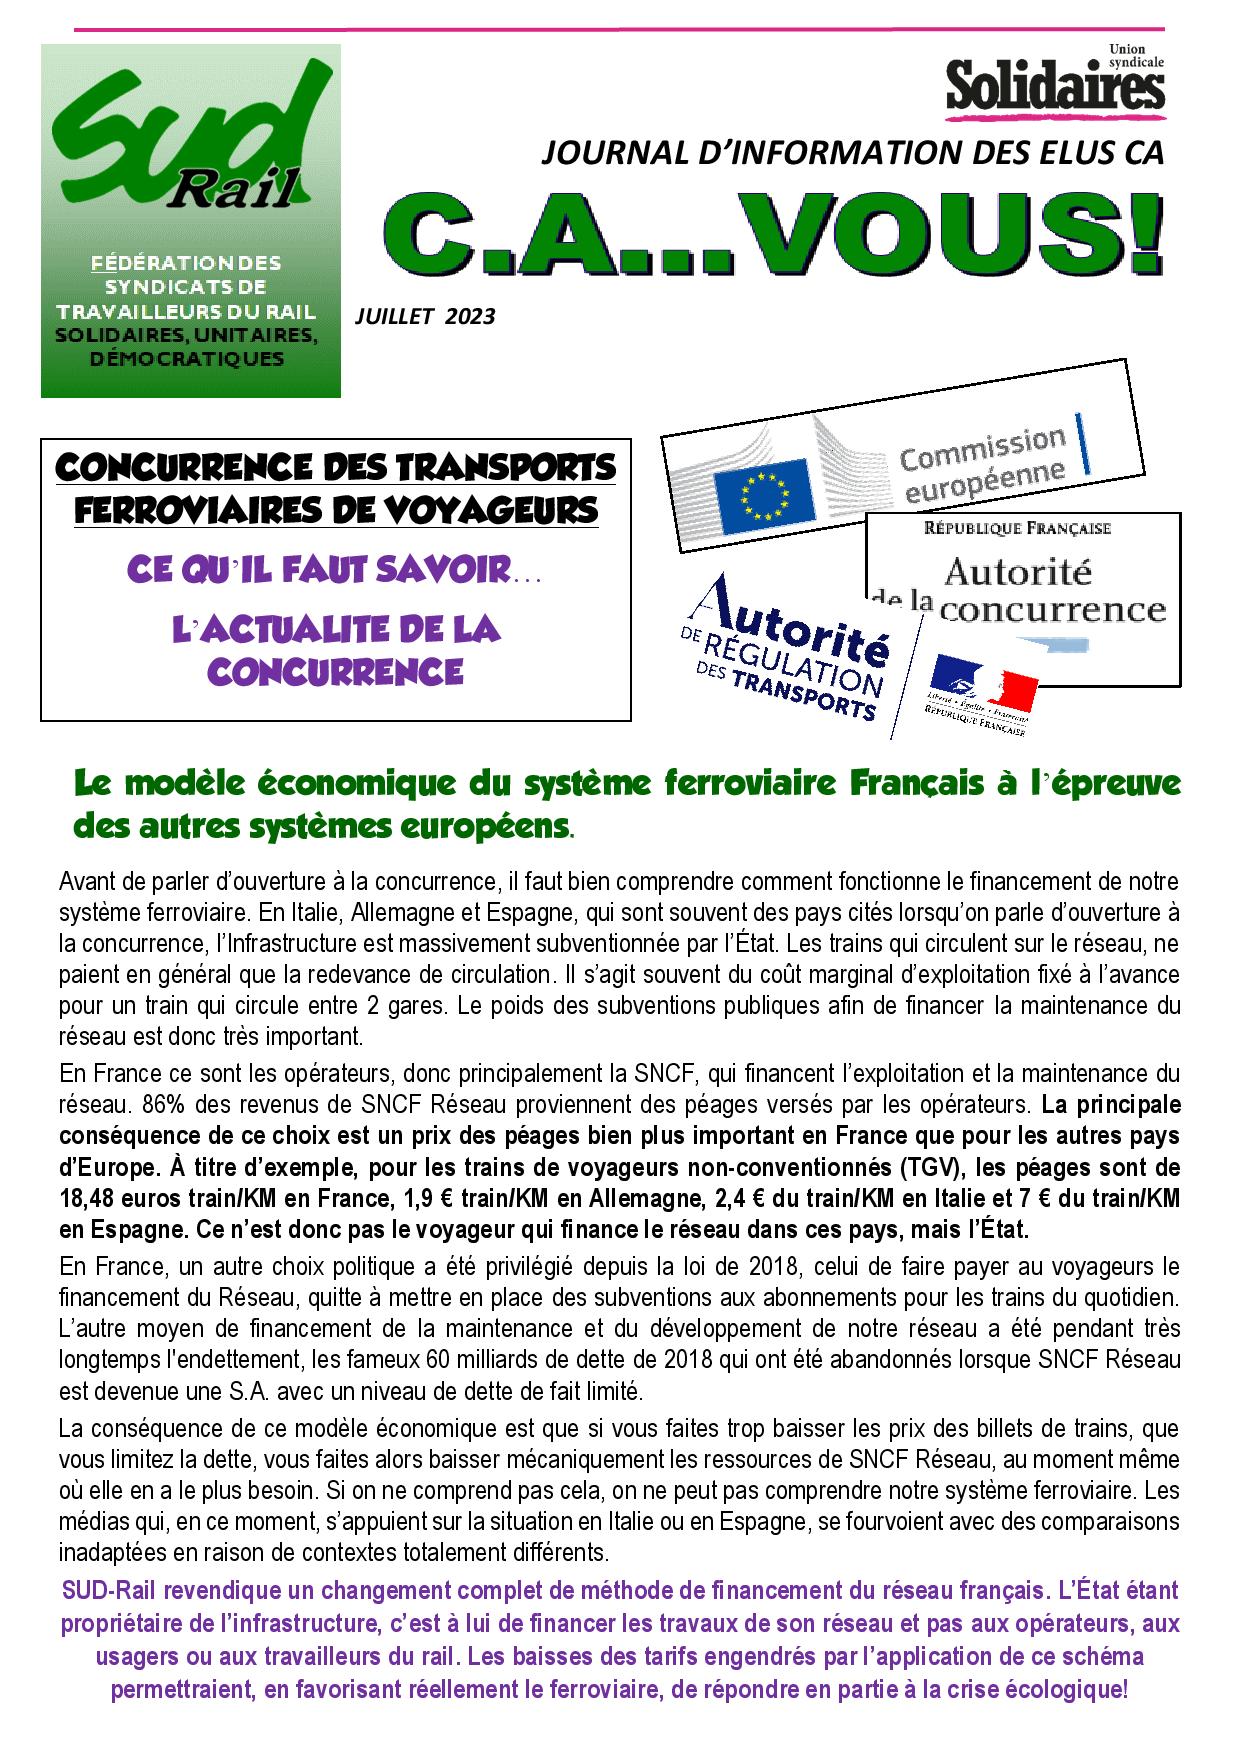 2023 07 04 CA.Vous.Concurrence page 001